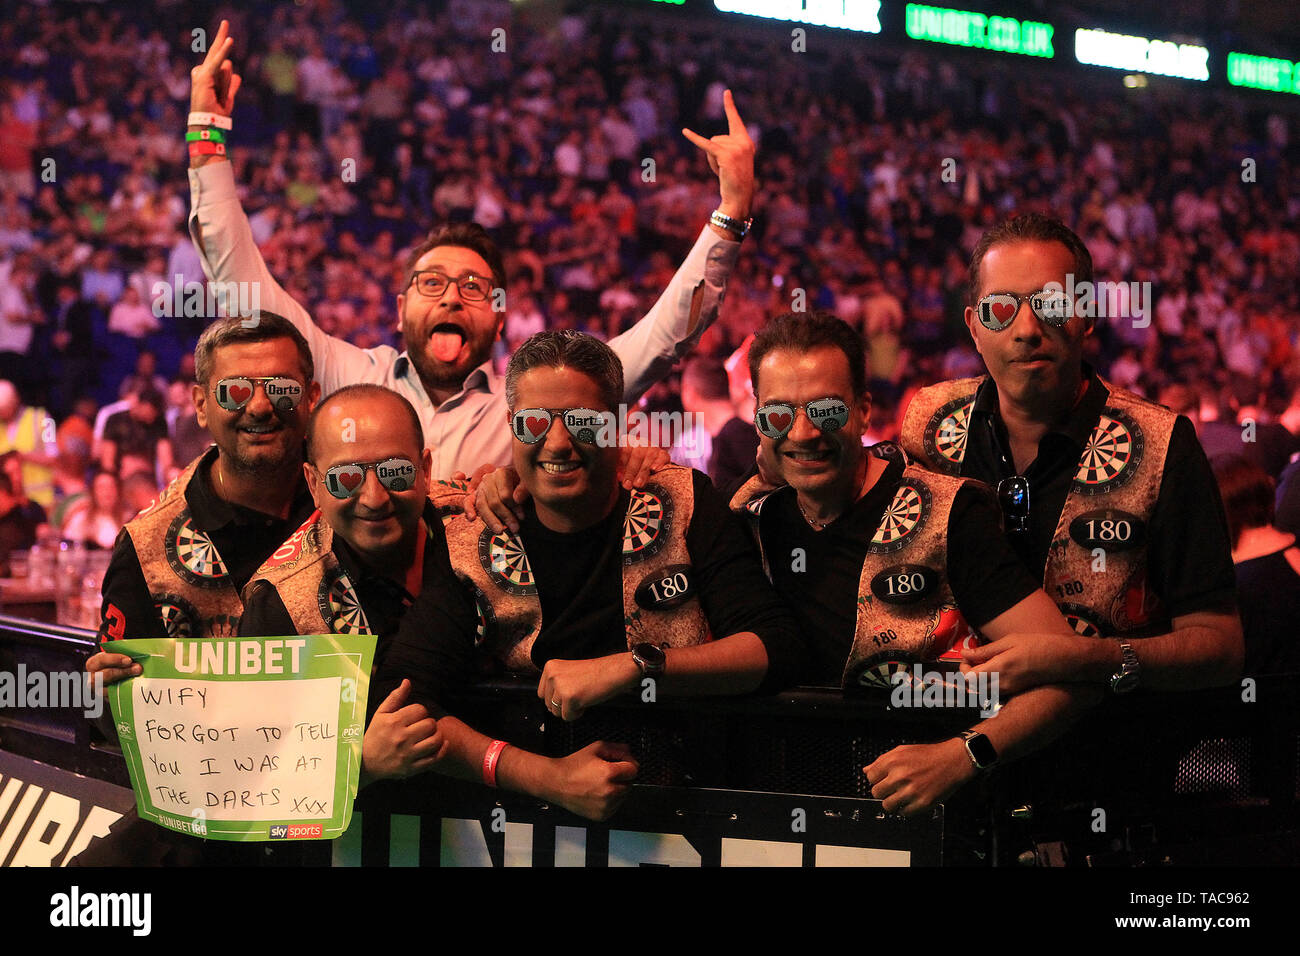 London, UK. 23rd May, 2019. General view of darts fans during the night's  action. 2019 Unibet Premier League Darts, play-offs at the O2 Arena in  London on Thursday 23rd May 2019 this